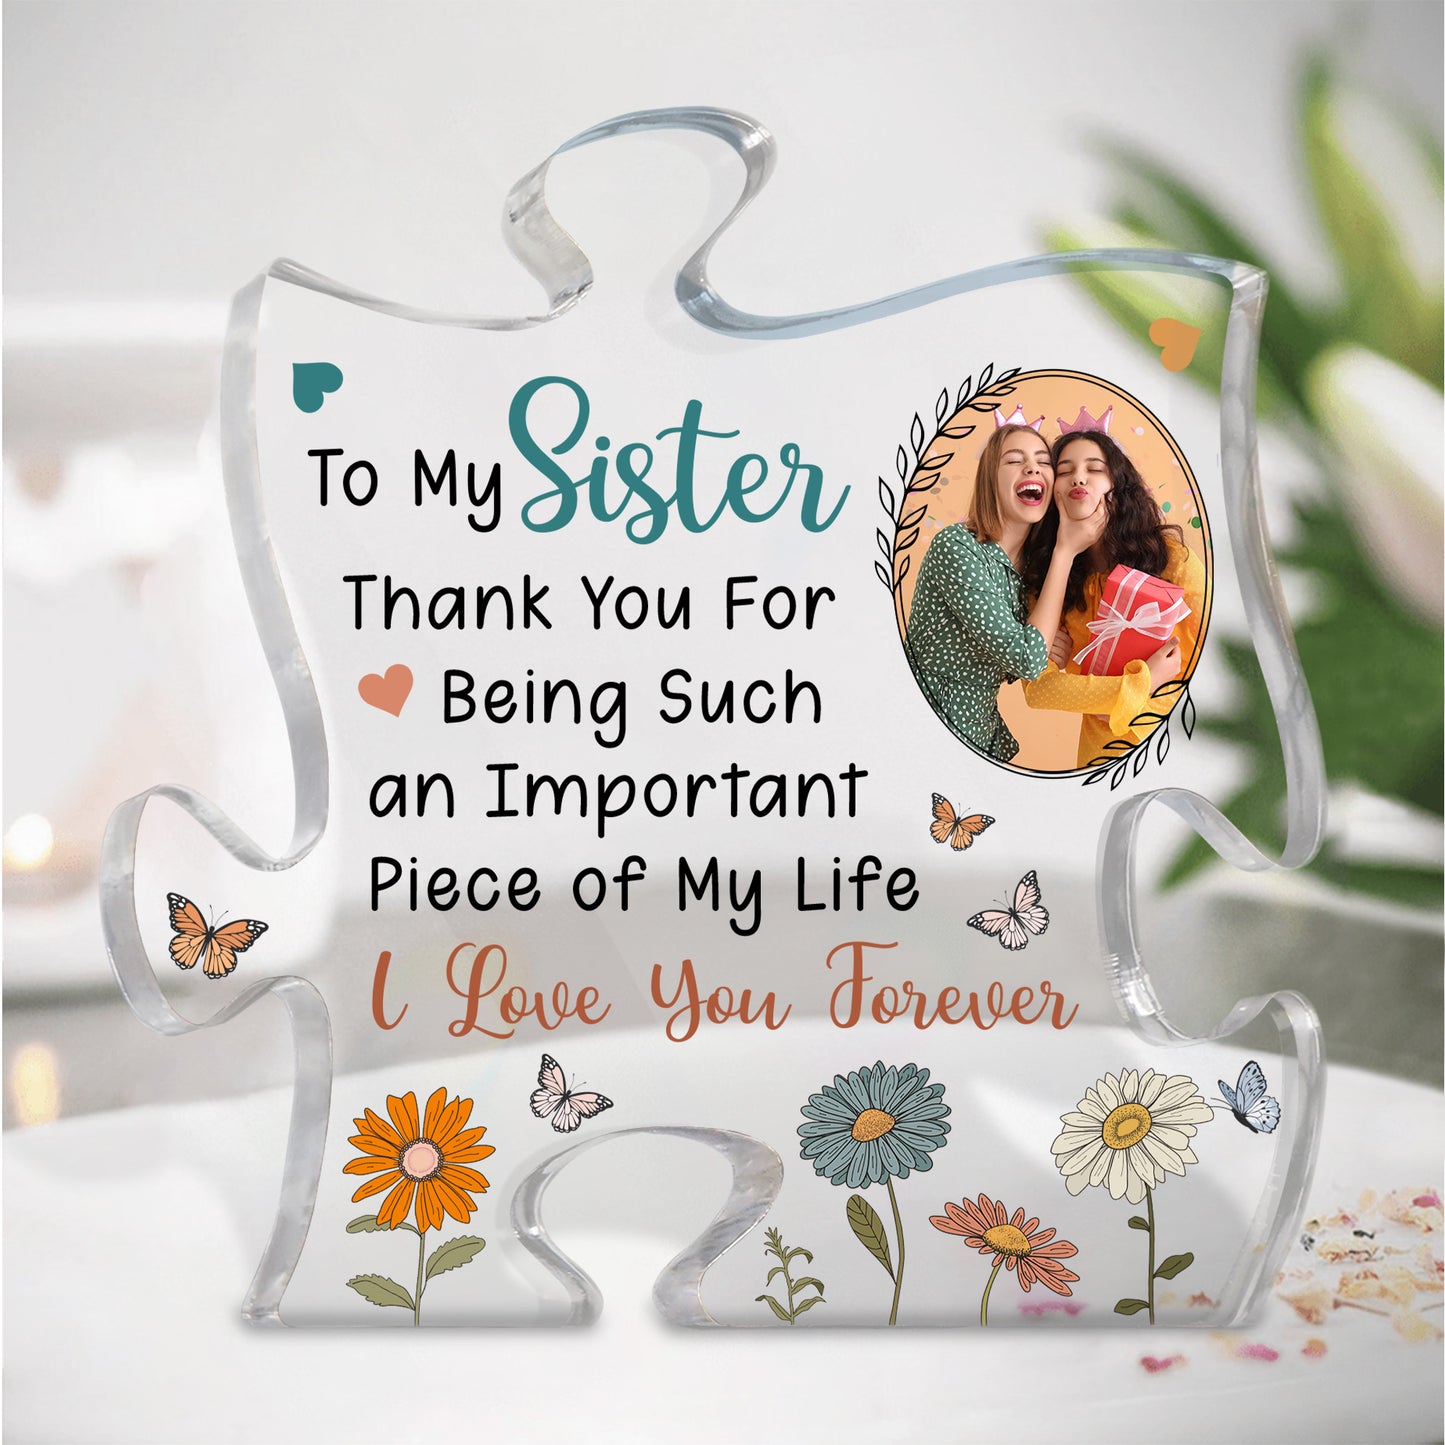 Thank You For An Important Piece Of My Life Sisters Friends - Personalized Acrylic Photo Plaque